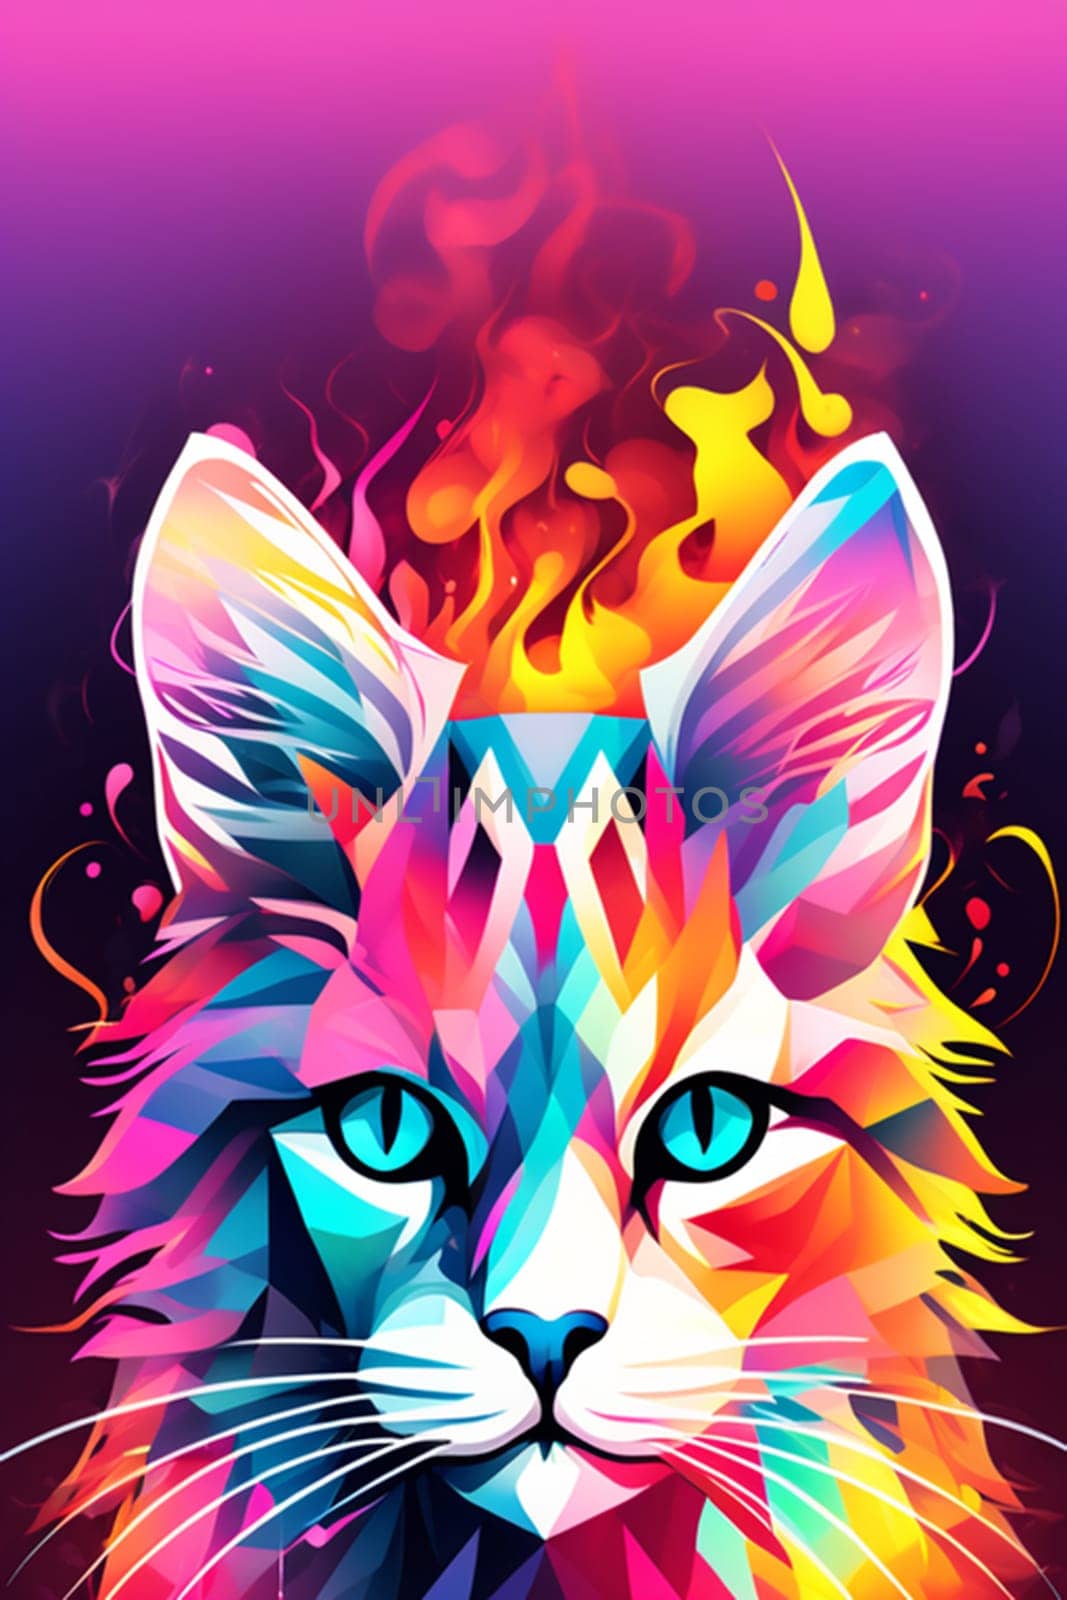 Cat head in pop art style. Minimalist style, neon line logo, depicting a mosaic geometric cat surrounded by vibrant smoke effects on a scarlet background by Ekaterina34